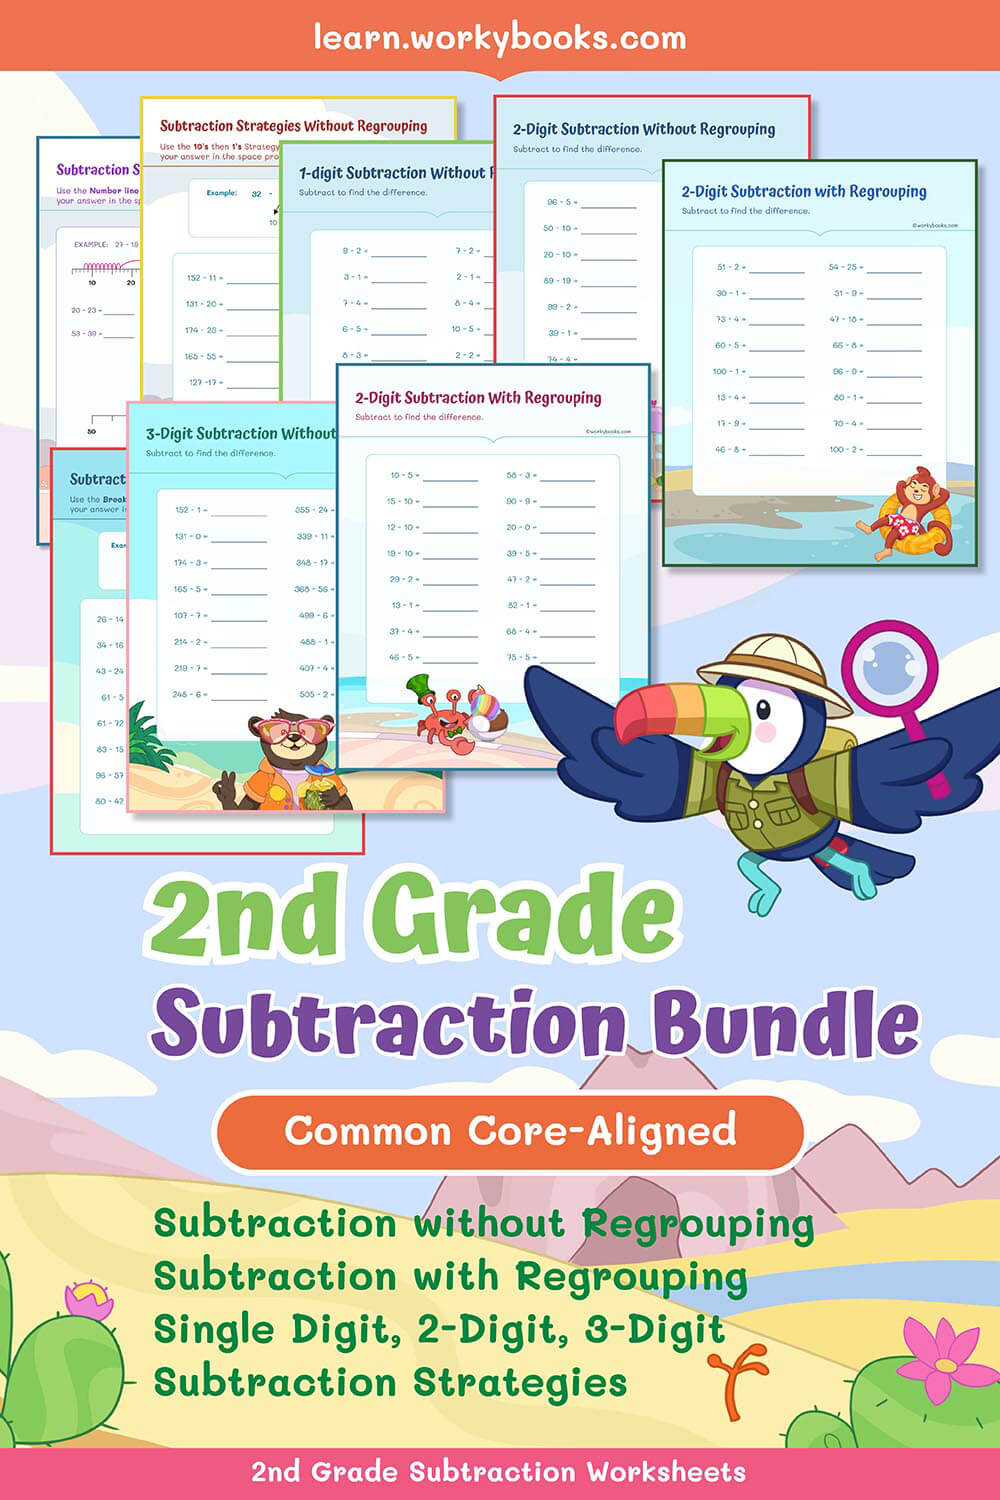 2nd grade subtraction workhseets